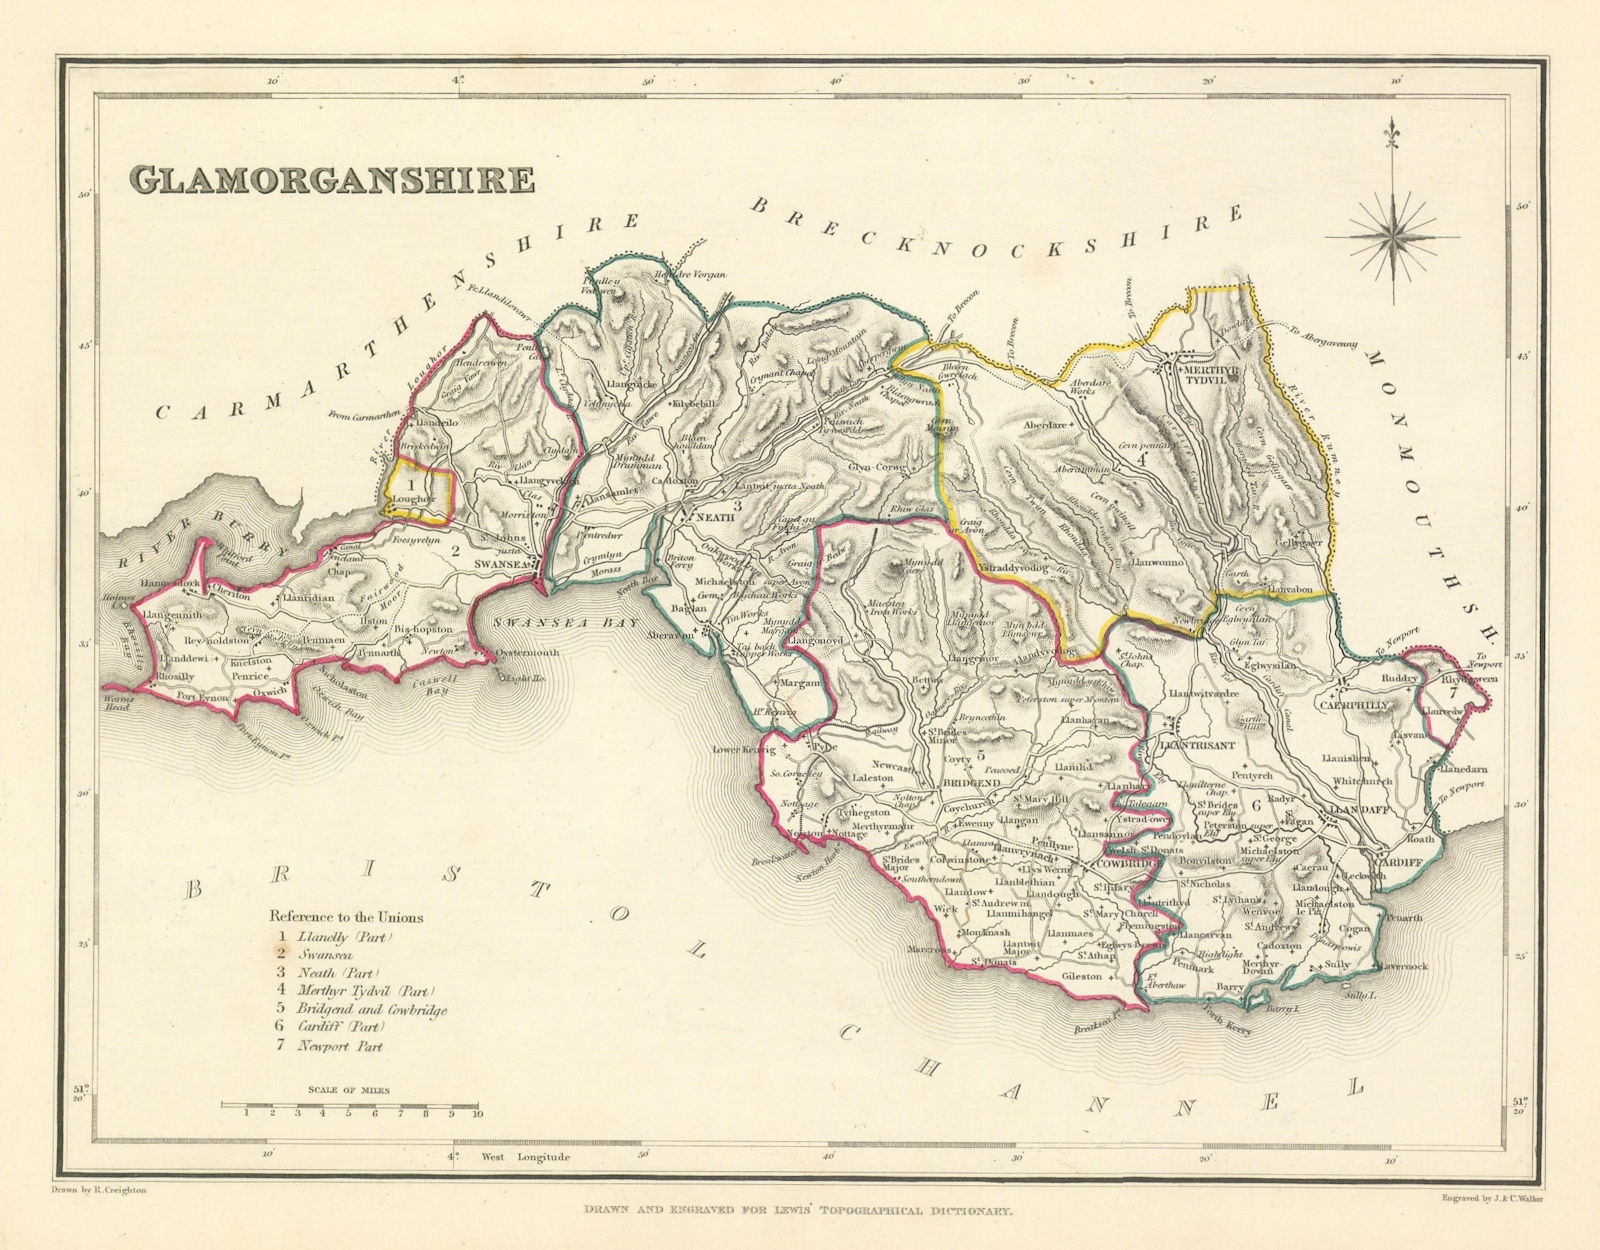 Associate Product Antique county map of GLAMORGANSHIRE by Creighton & Walker for Lewis c1840